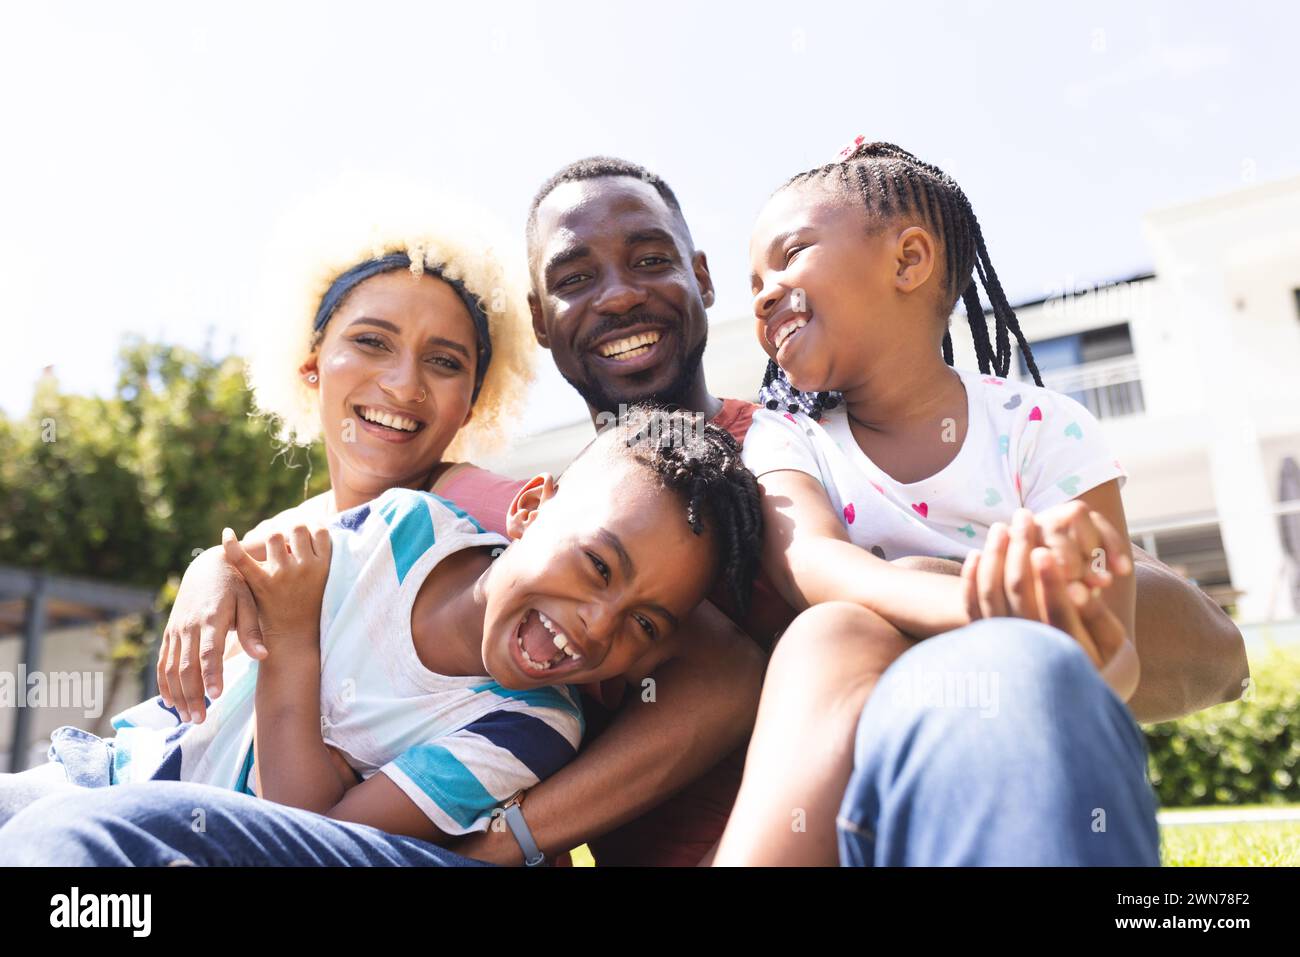 Diverse family enjoys a sunny day outdoors, sharing laughter and joy Stock Photo